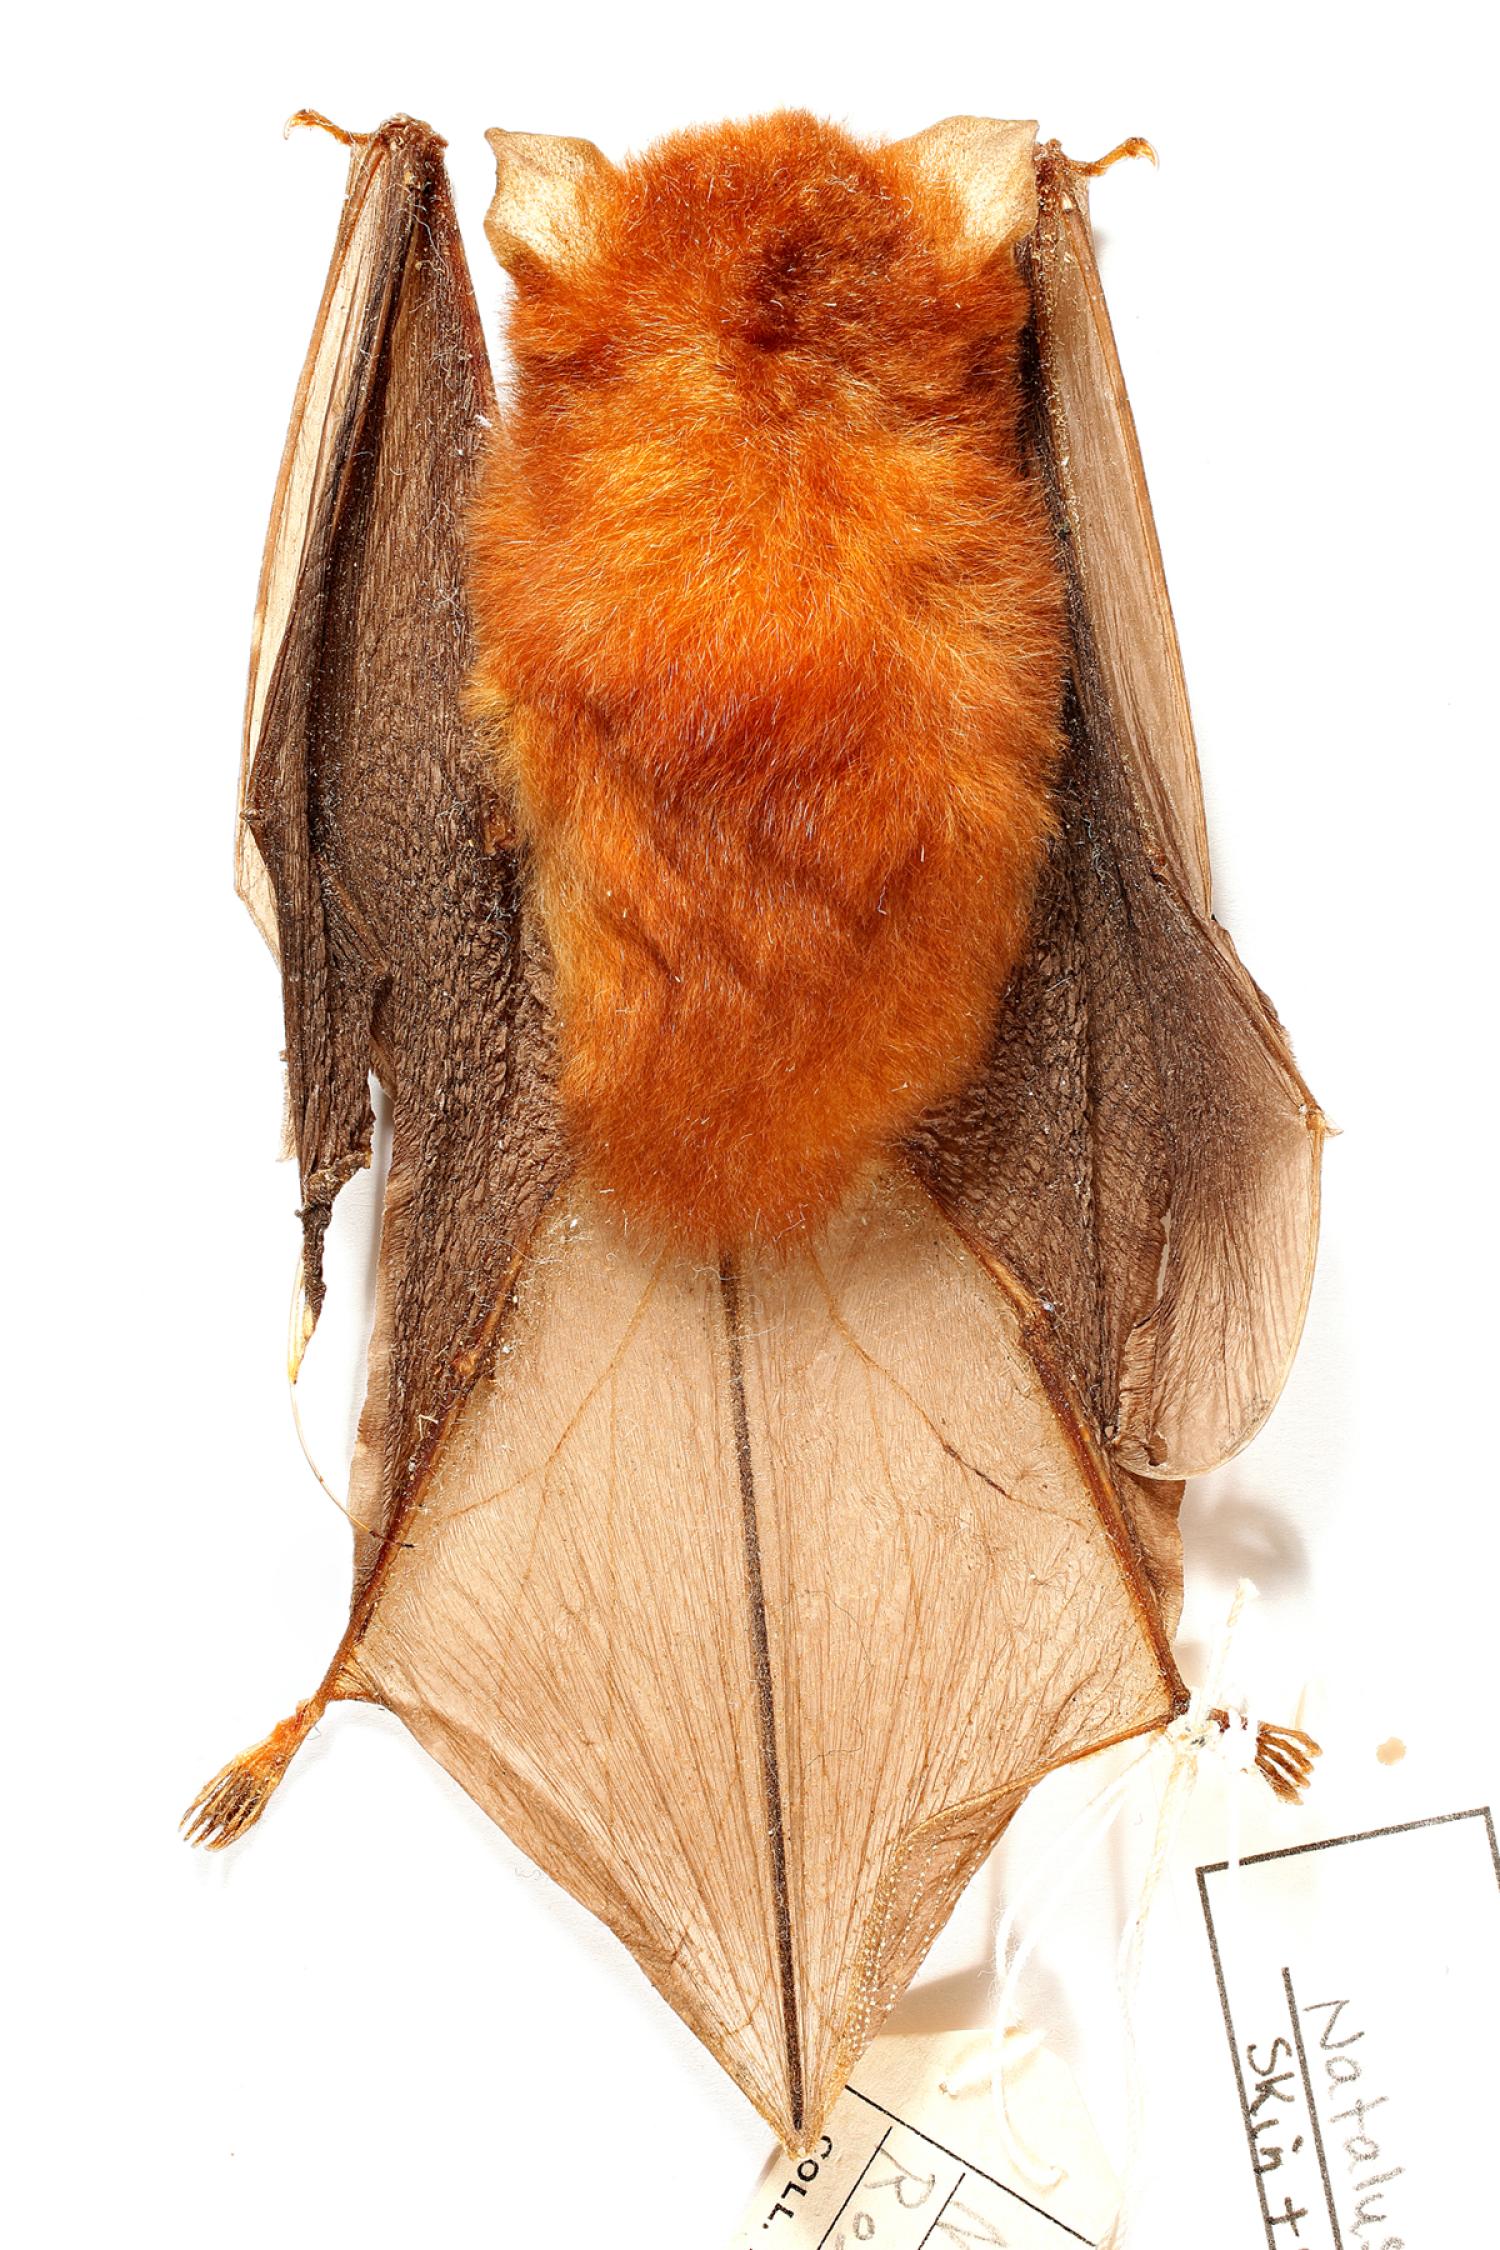 Mexican greater funnel-eared bat (Natalus stramineus mexicanus)